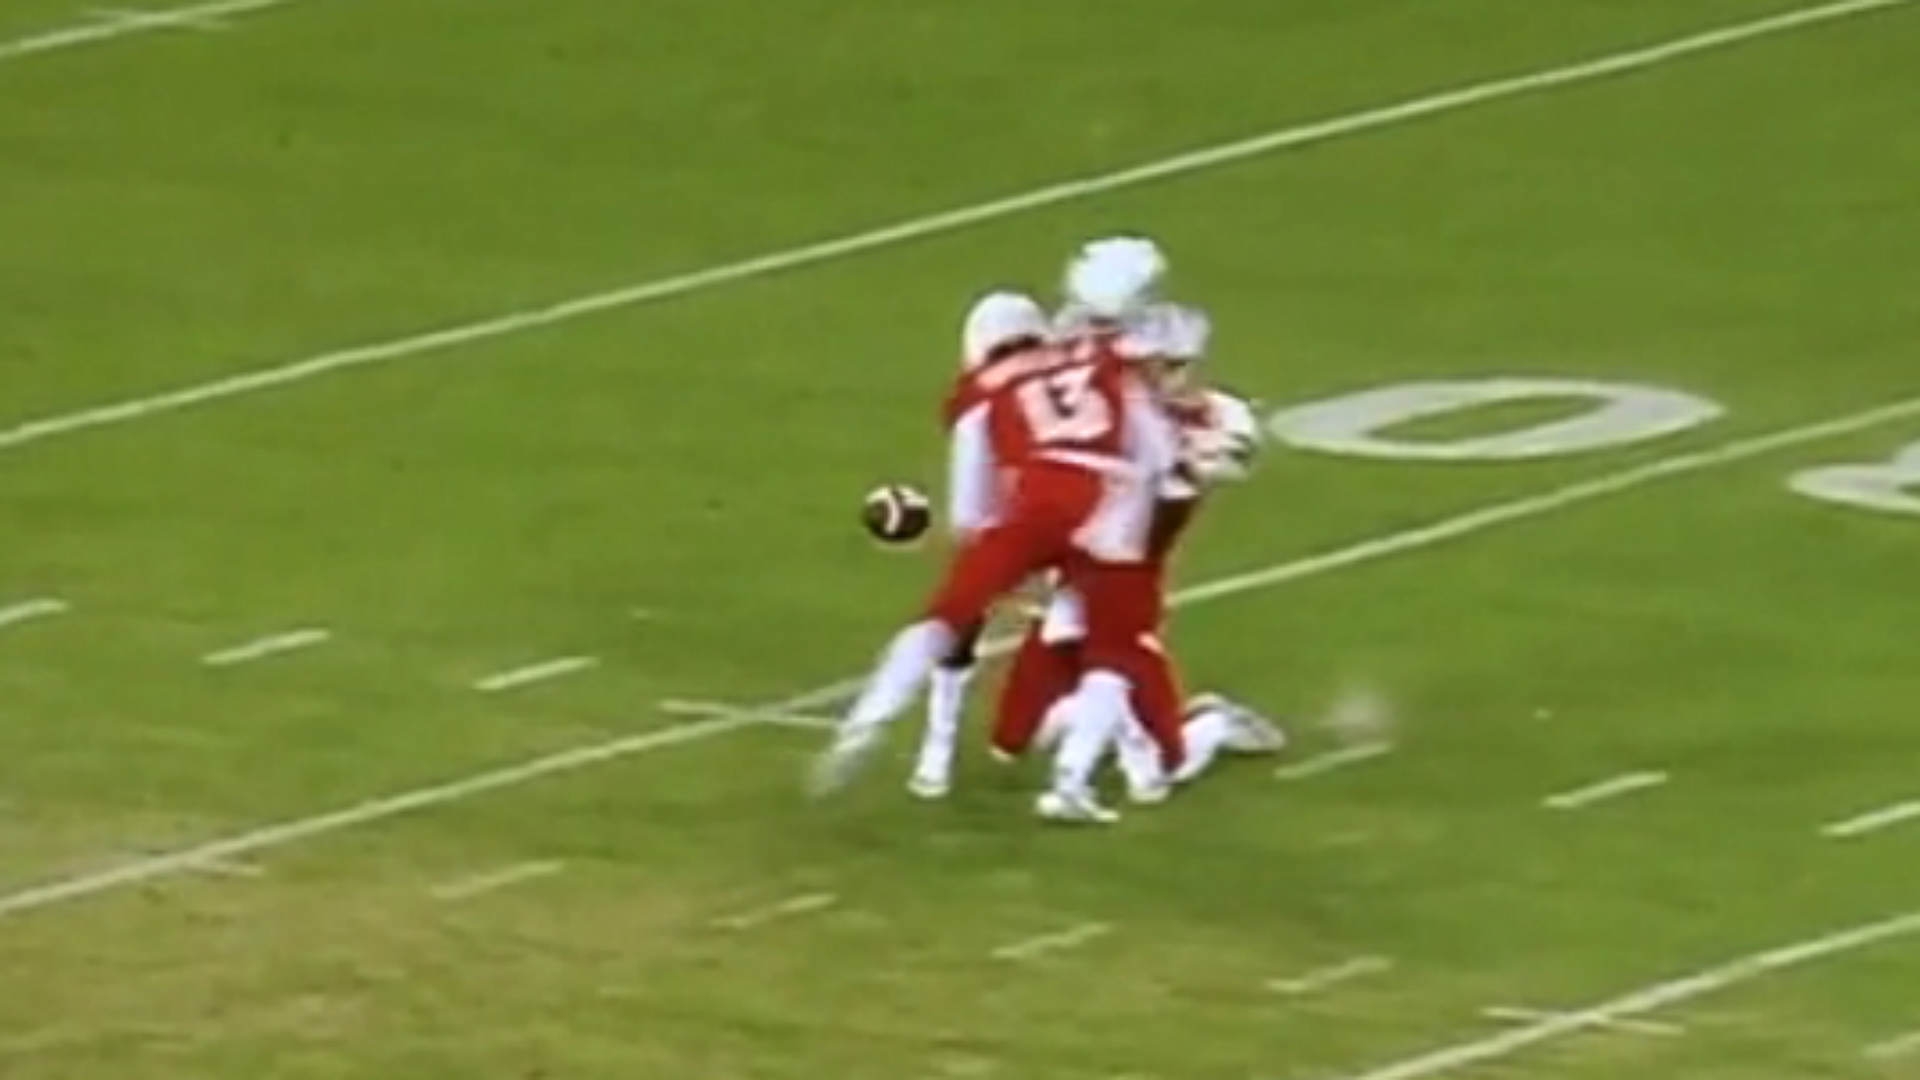 Louisville's James Burgess ejected for targeting on first play of Music City Bowl